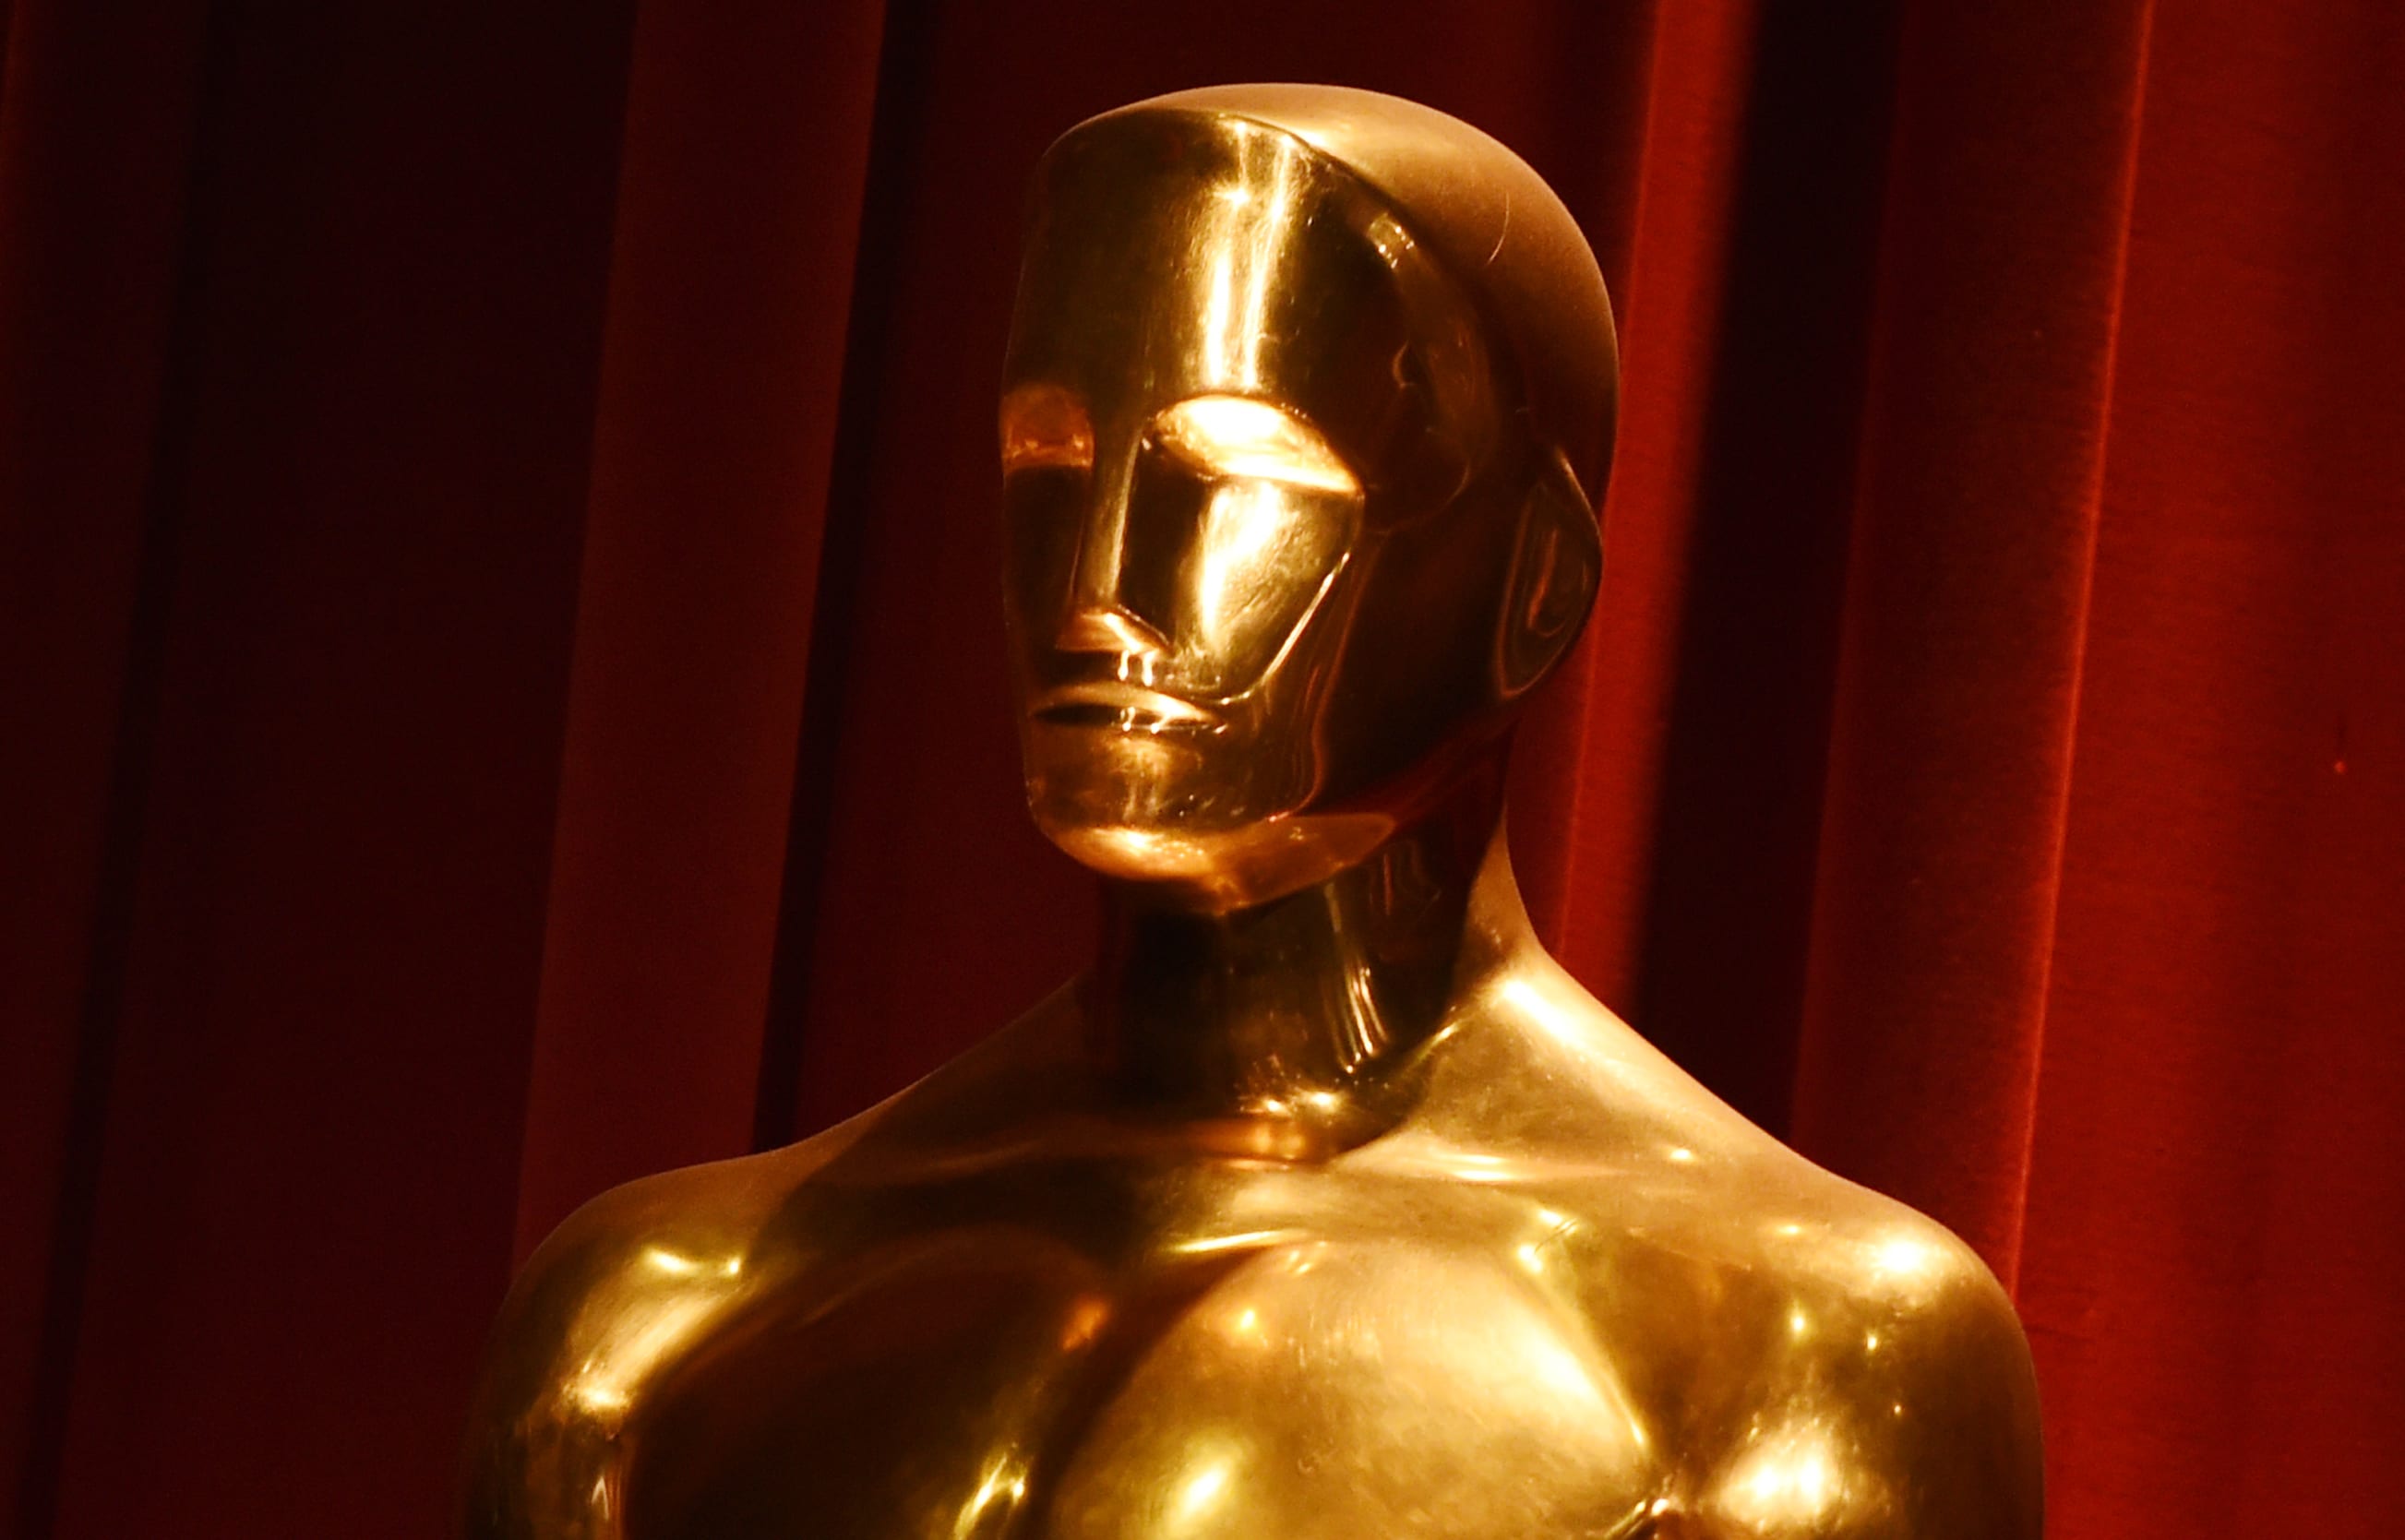 An Oscar statue is on display during the Academy Awards Nominations Announcement at the Samuel Goldwyn Theater in Beverly Hills, California on January 14, 2016.